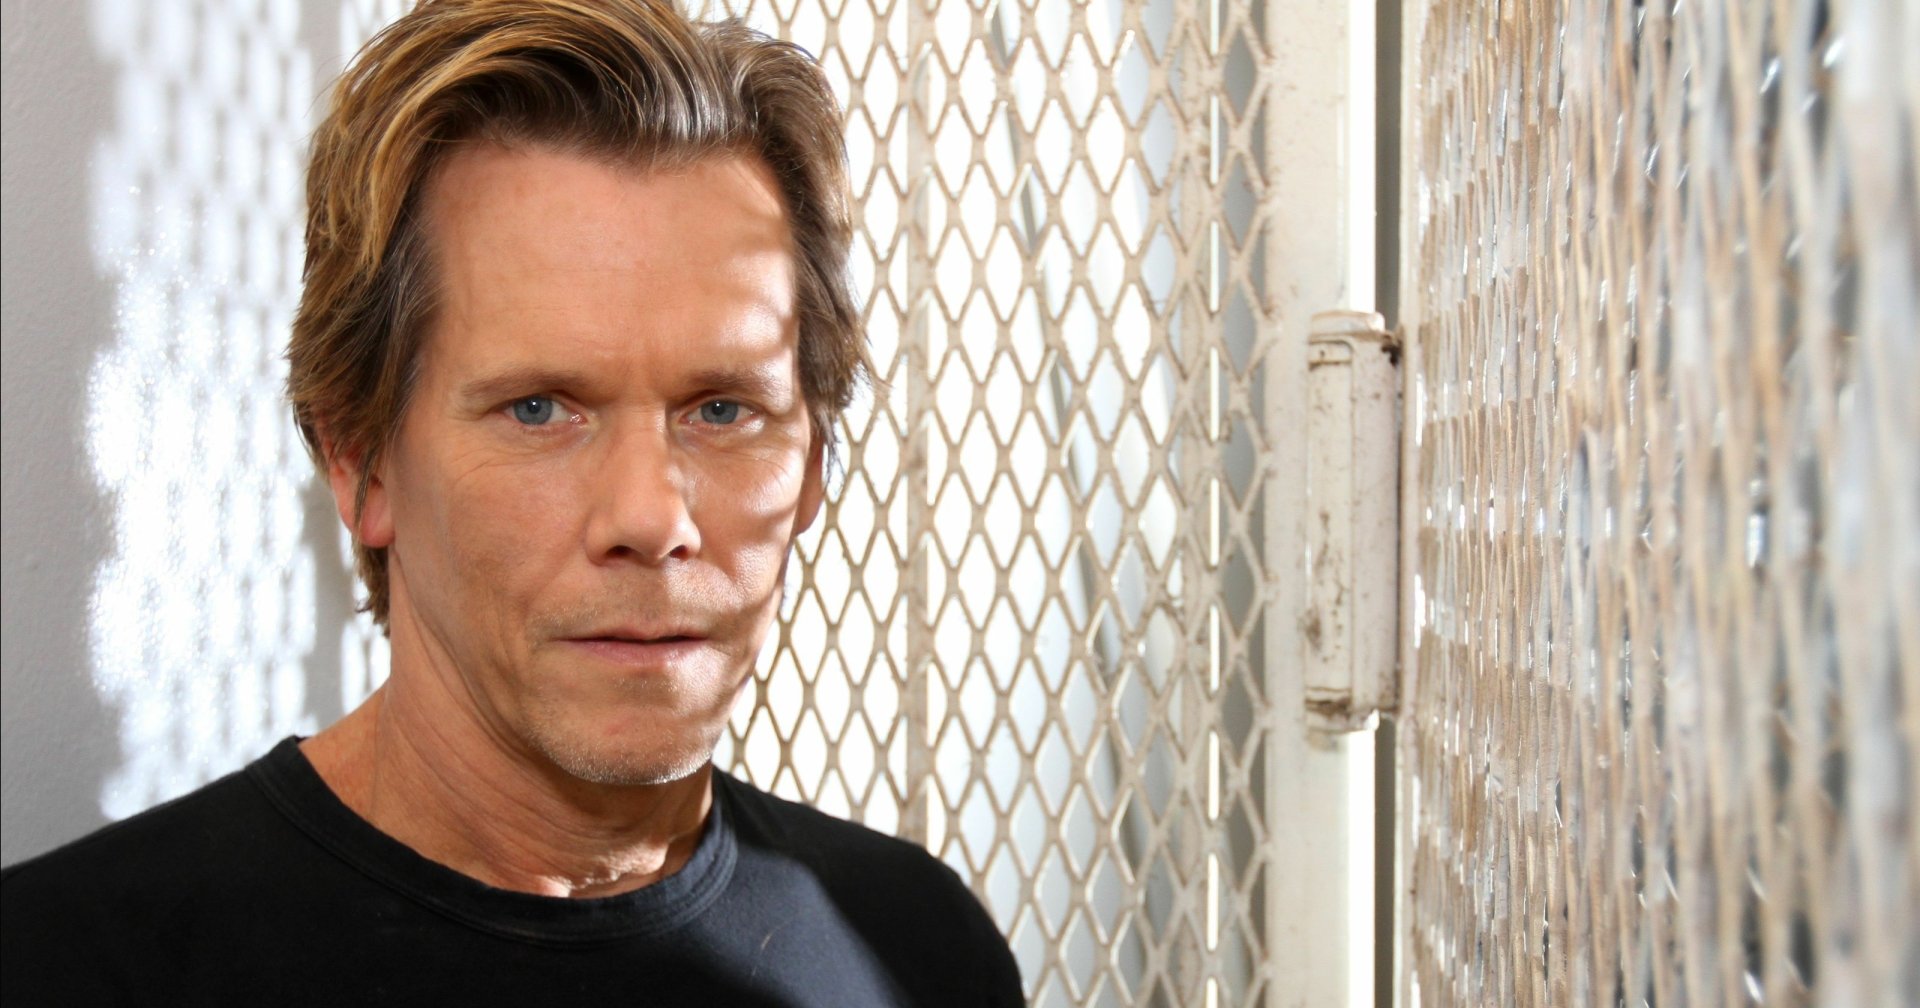 Download Face Blue Eyes American Actor Celebrity Kevin Bacon  HD Wallpaper